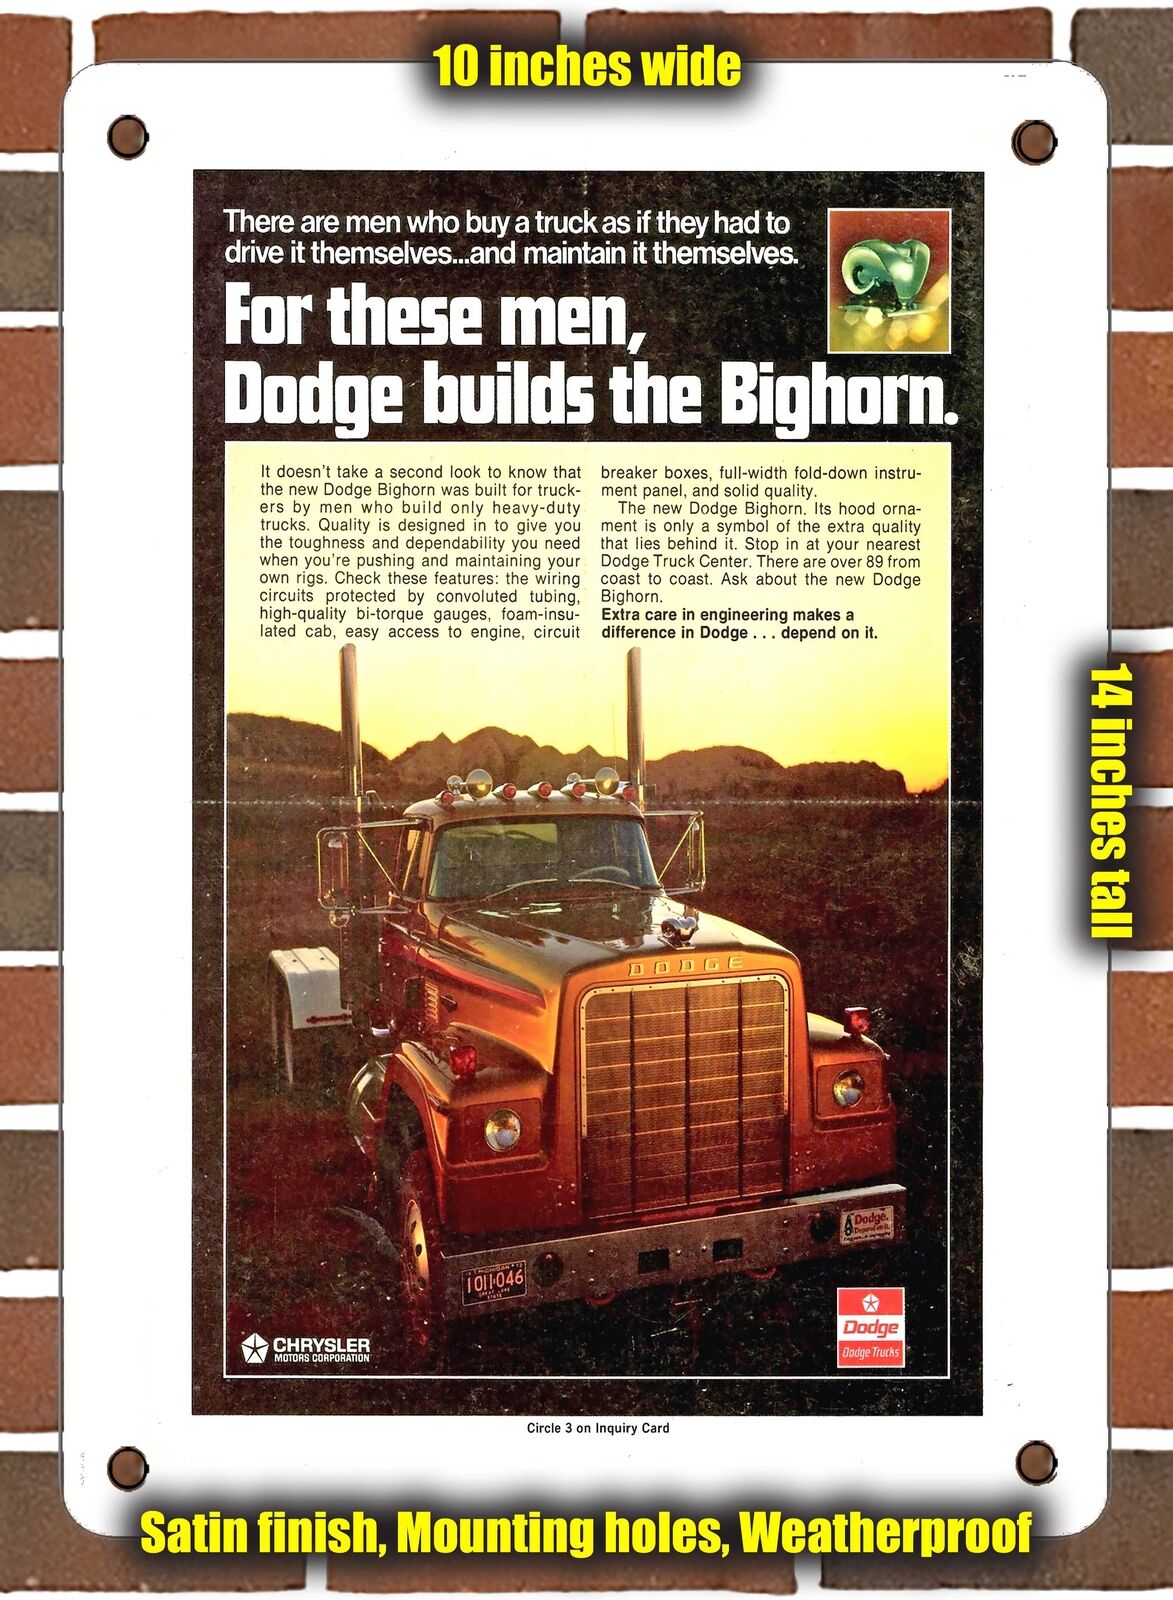 METAL SIGN - 1973 Dodge Bighorn Truck - 10x14 Inches